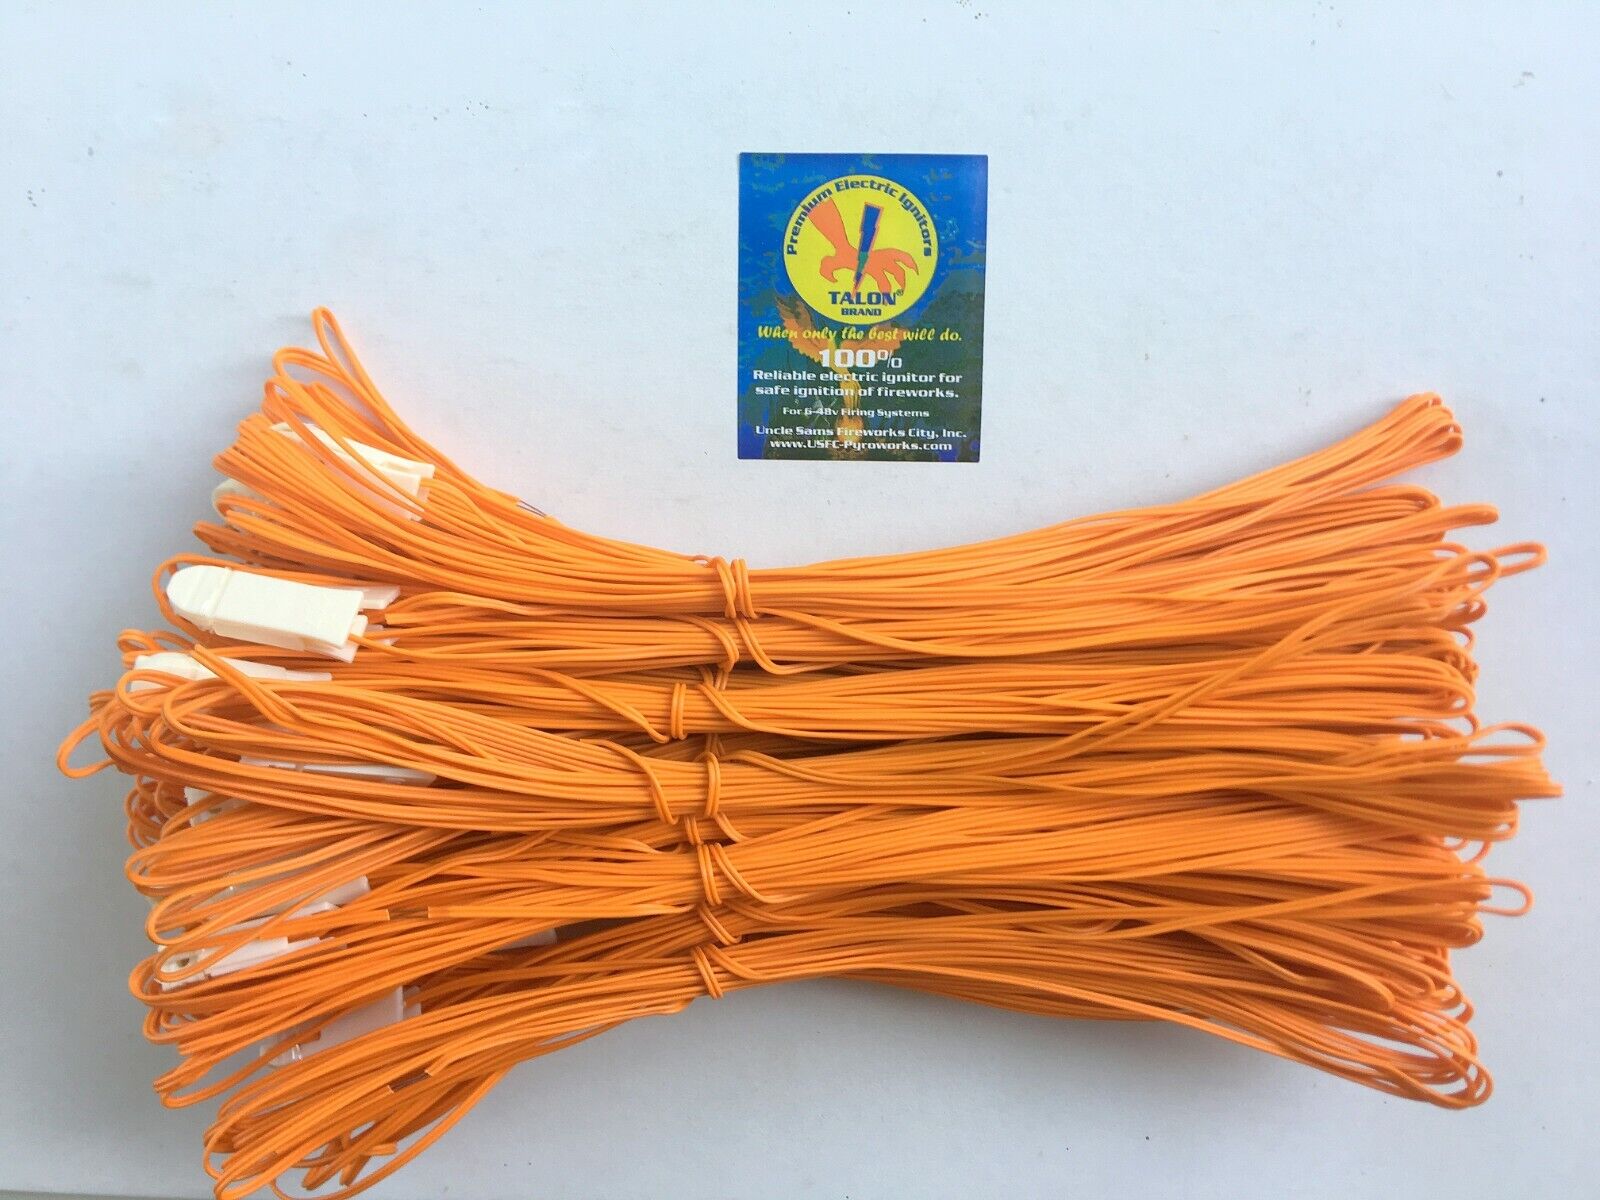 Genuine 5M Talon® Igniter (5 meter lead wires) for Fireworks Firing System-25pc,